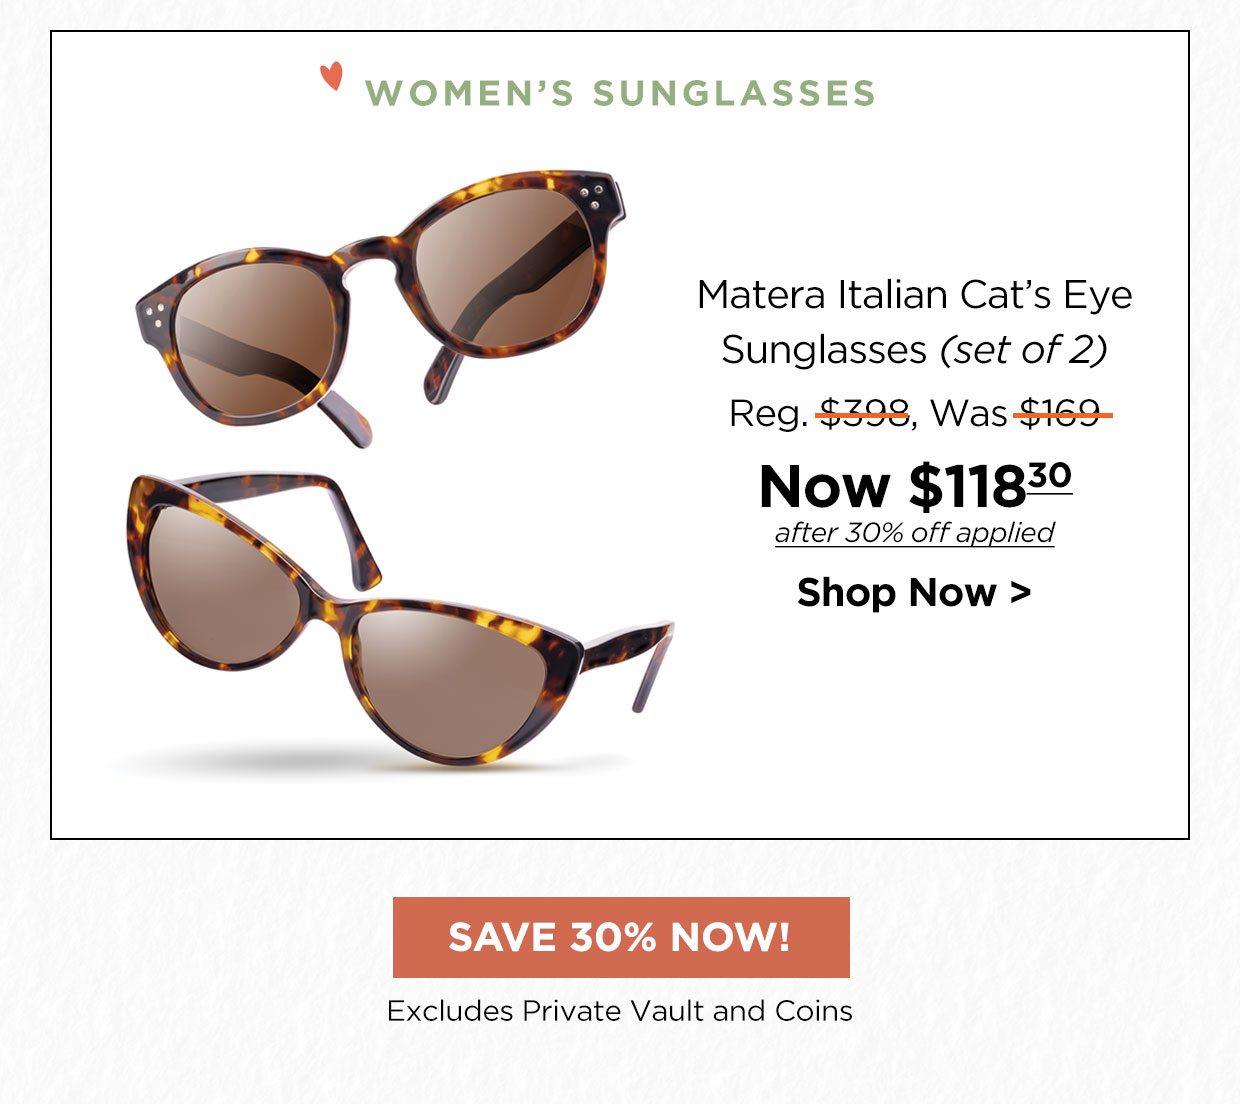 WOMEN'S SUNGLASSES. Matera Italian Cat's Eye Sunglasses (set of 2), Reg. $398, Was $169, Now $118.30 after 30% off applied Shop Now link.